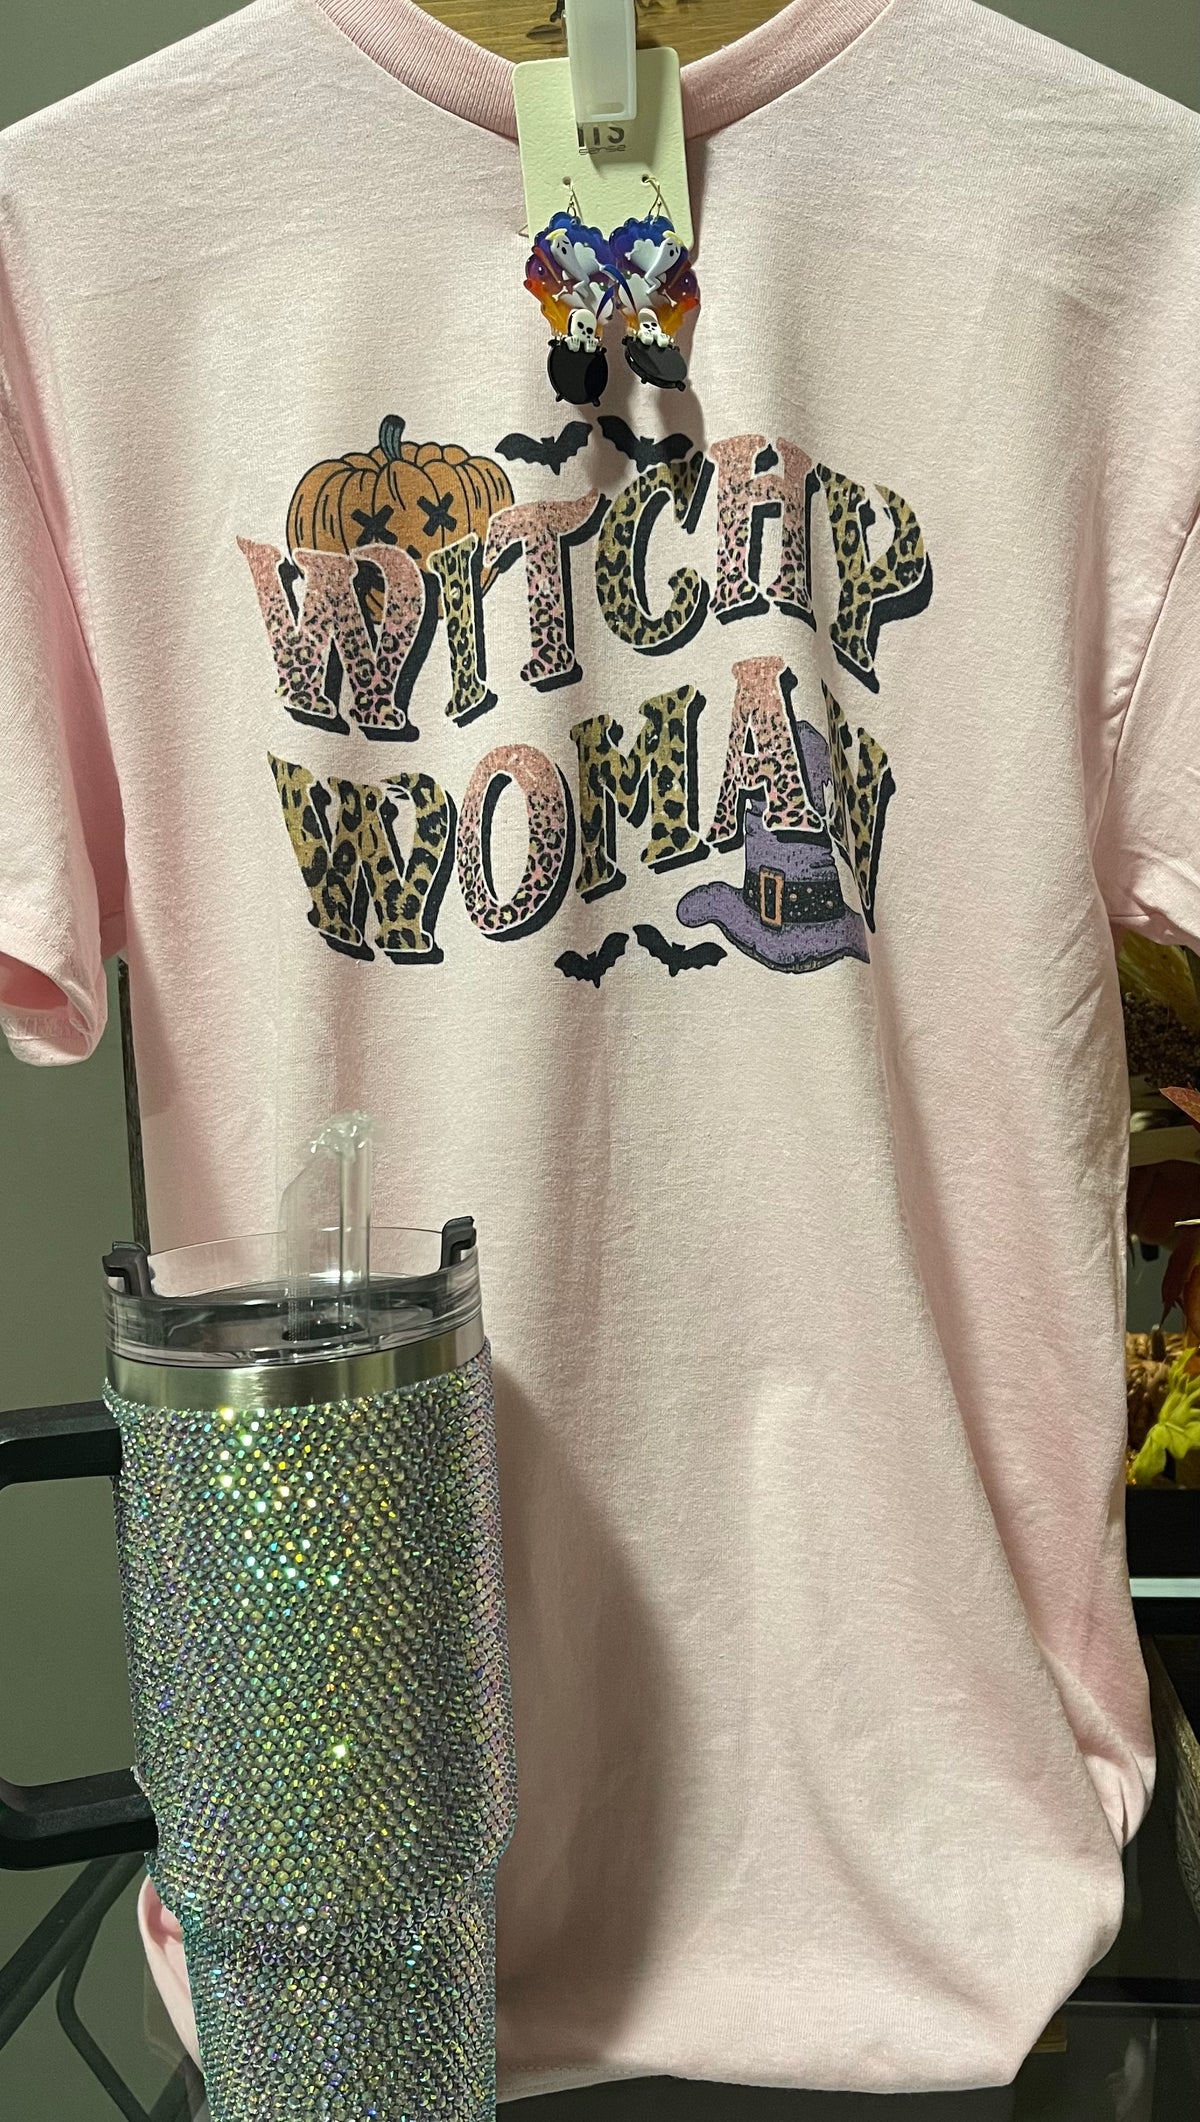 Witchy Woman Graphic Tee